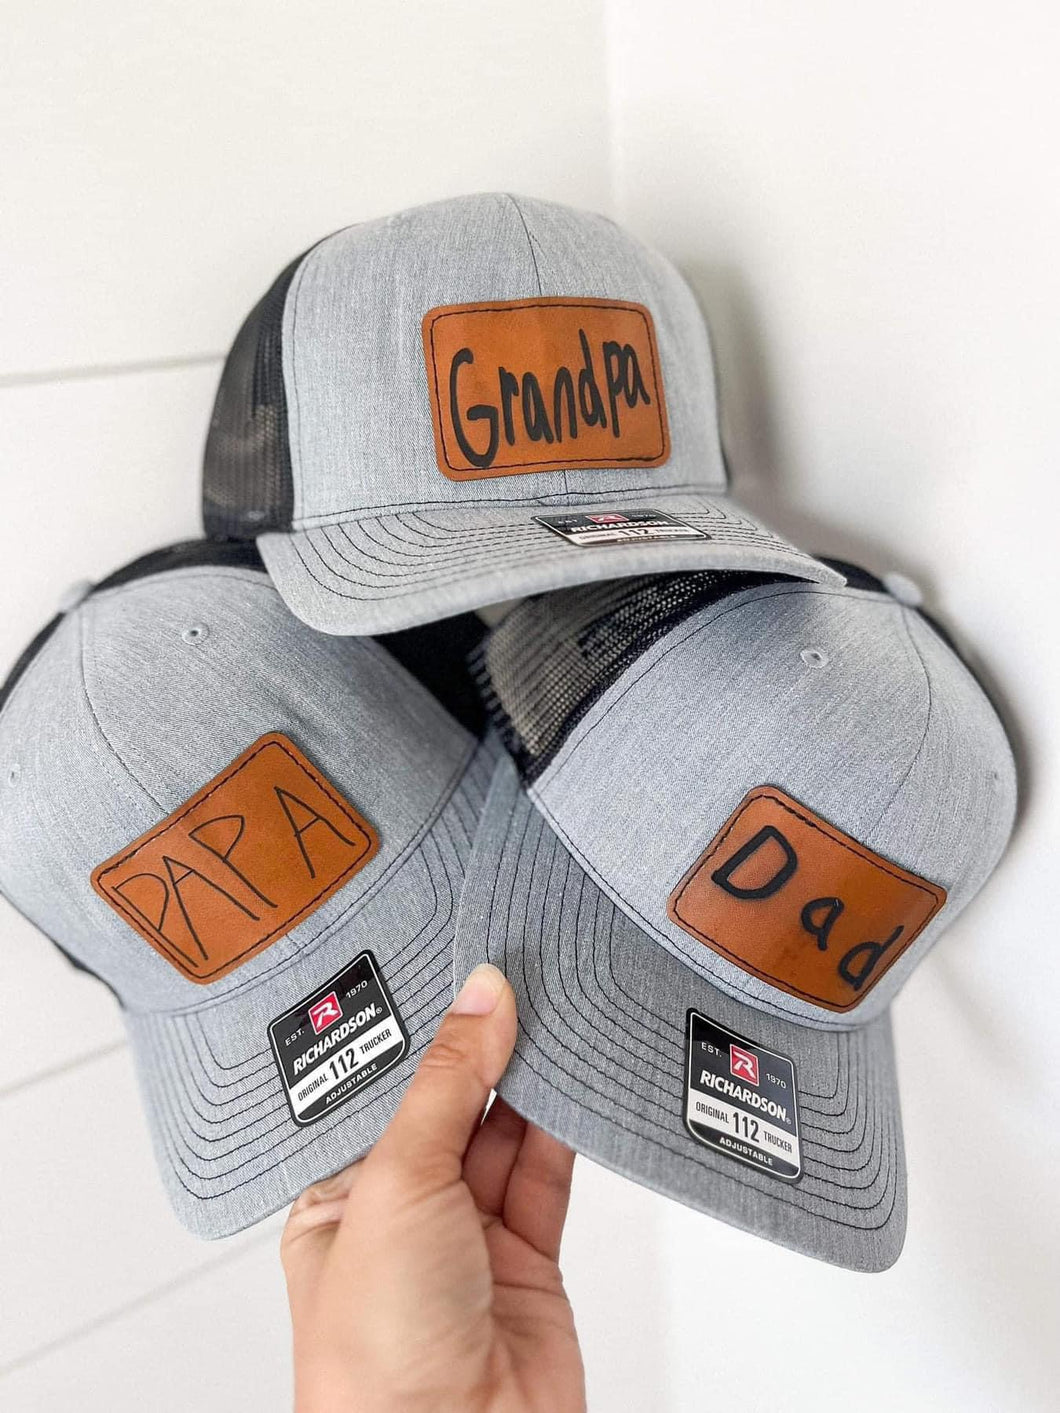 Men’s Hat with Customized Name